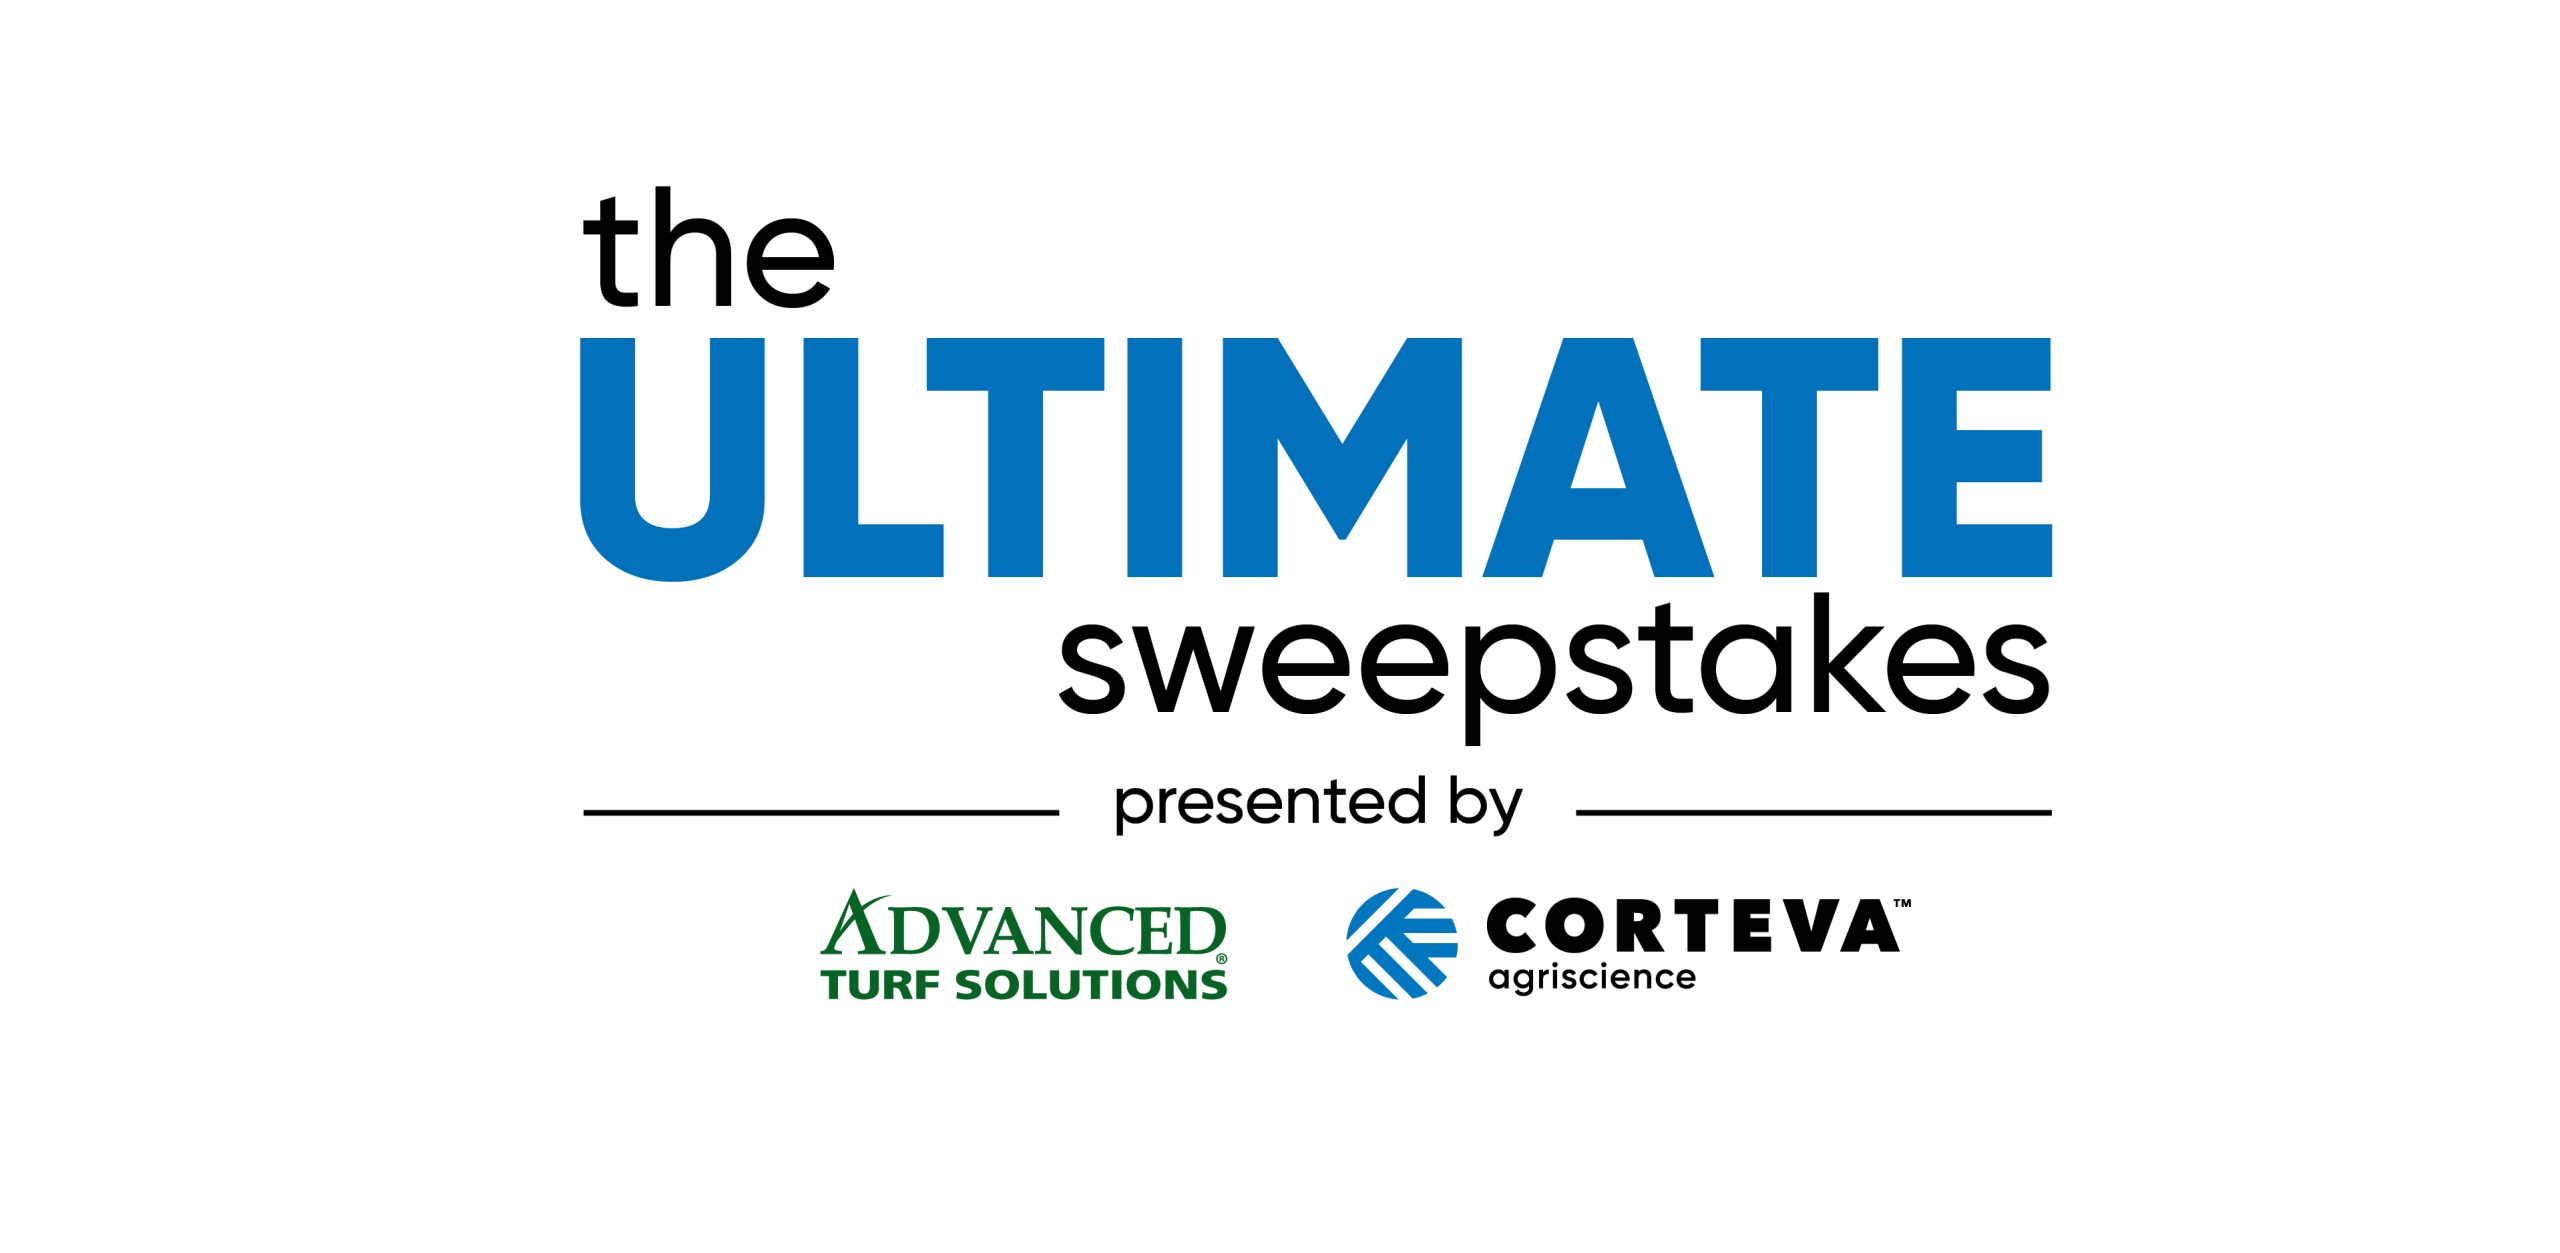 the ultimate sweepstakes presented by ats